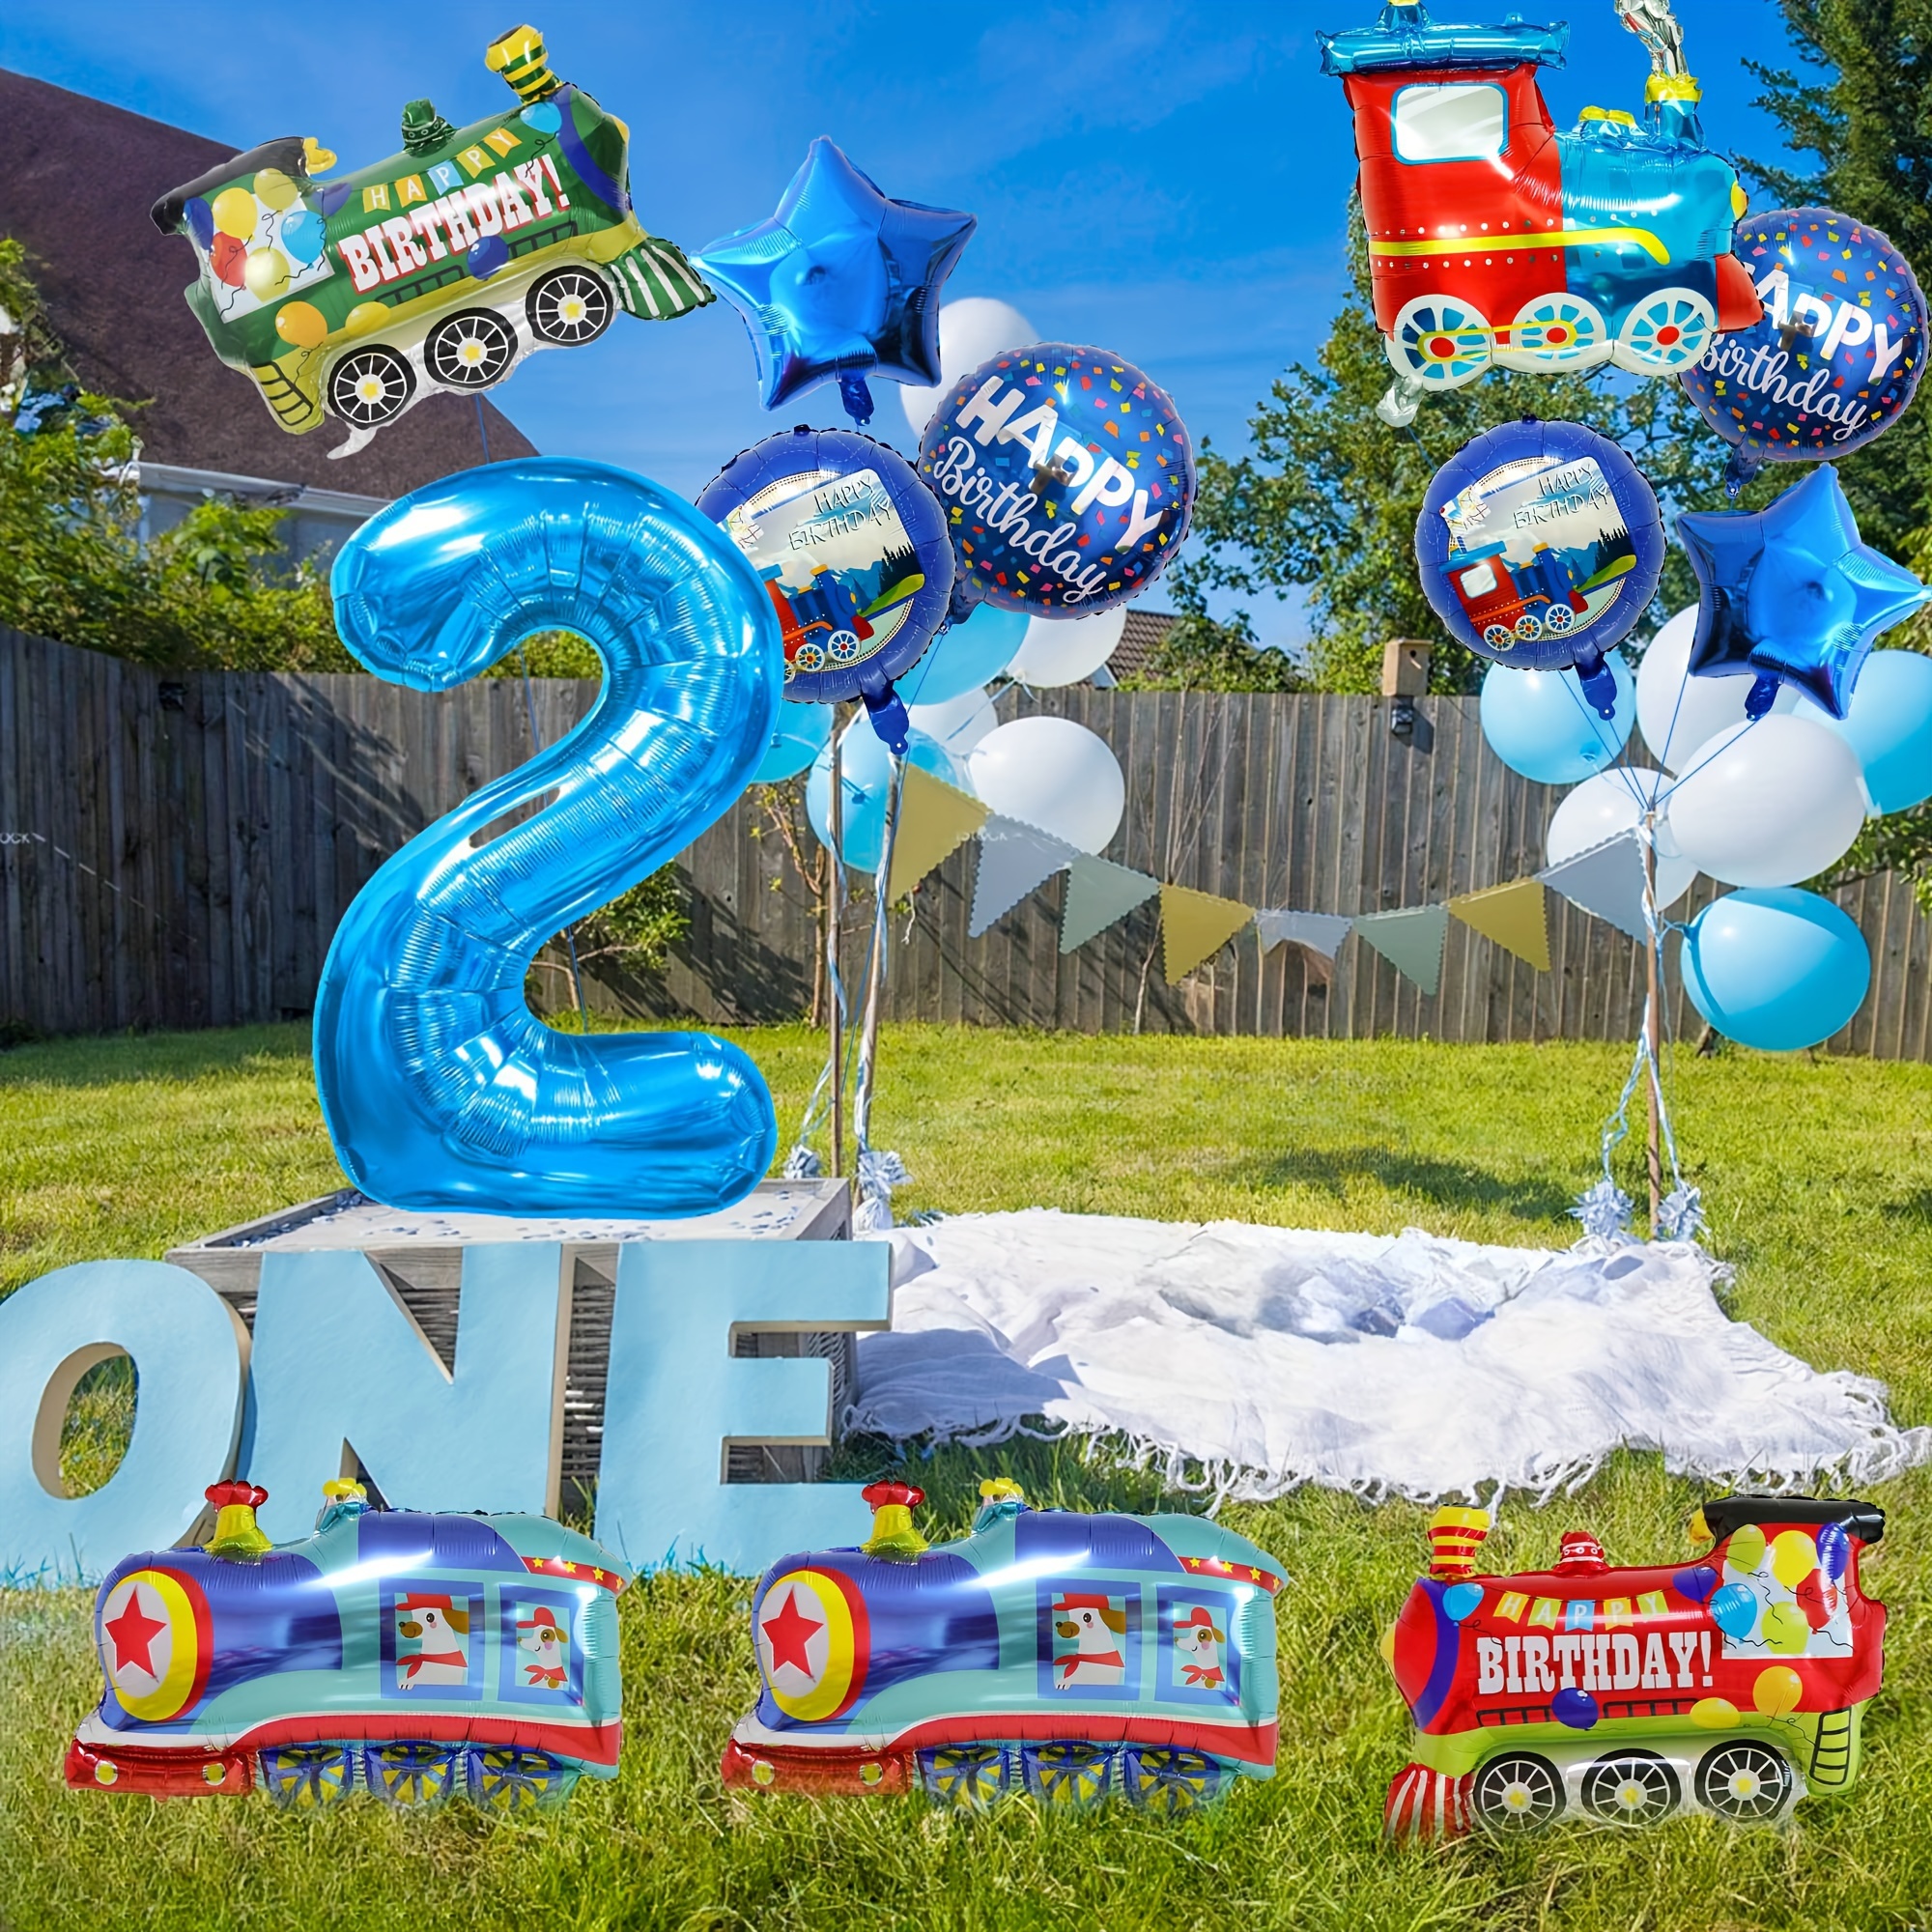 

12pcs Train Aluminum Foil Balloons Colored Train Polyester Film Balloons Car Themed Party Supplies Numbers 2 3 4 Birthday Party Supplies Decorations Easter Gift